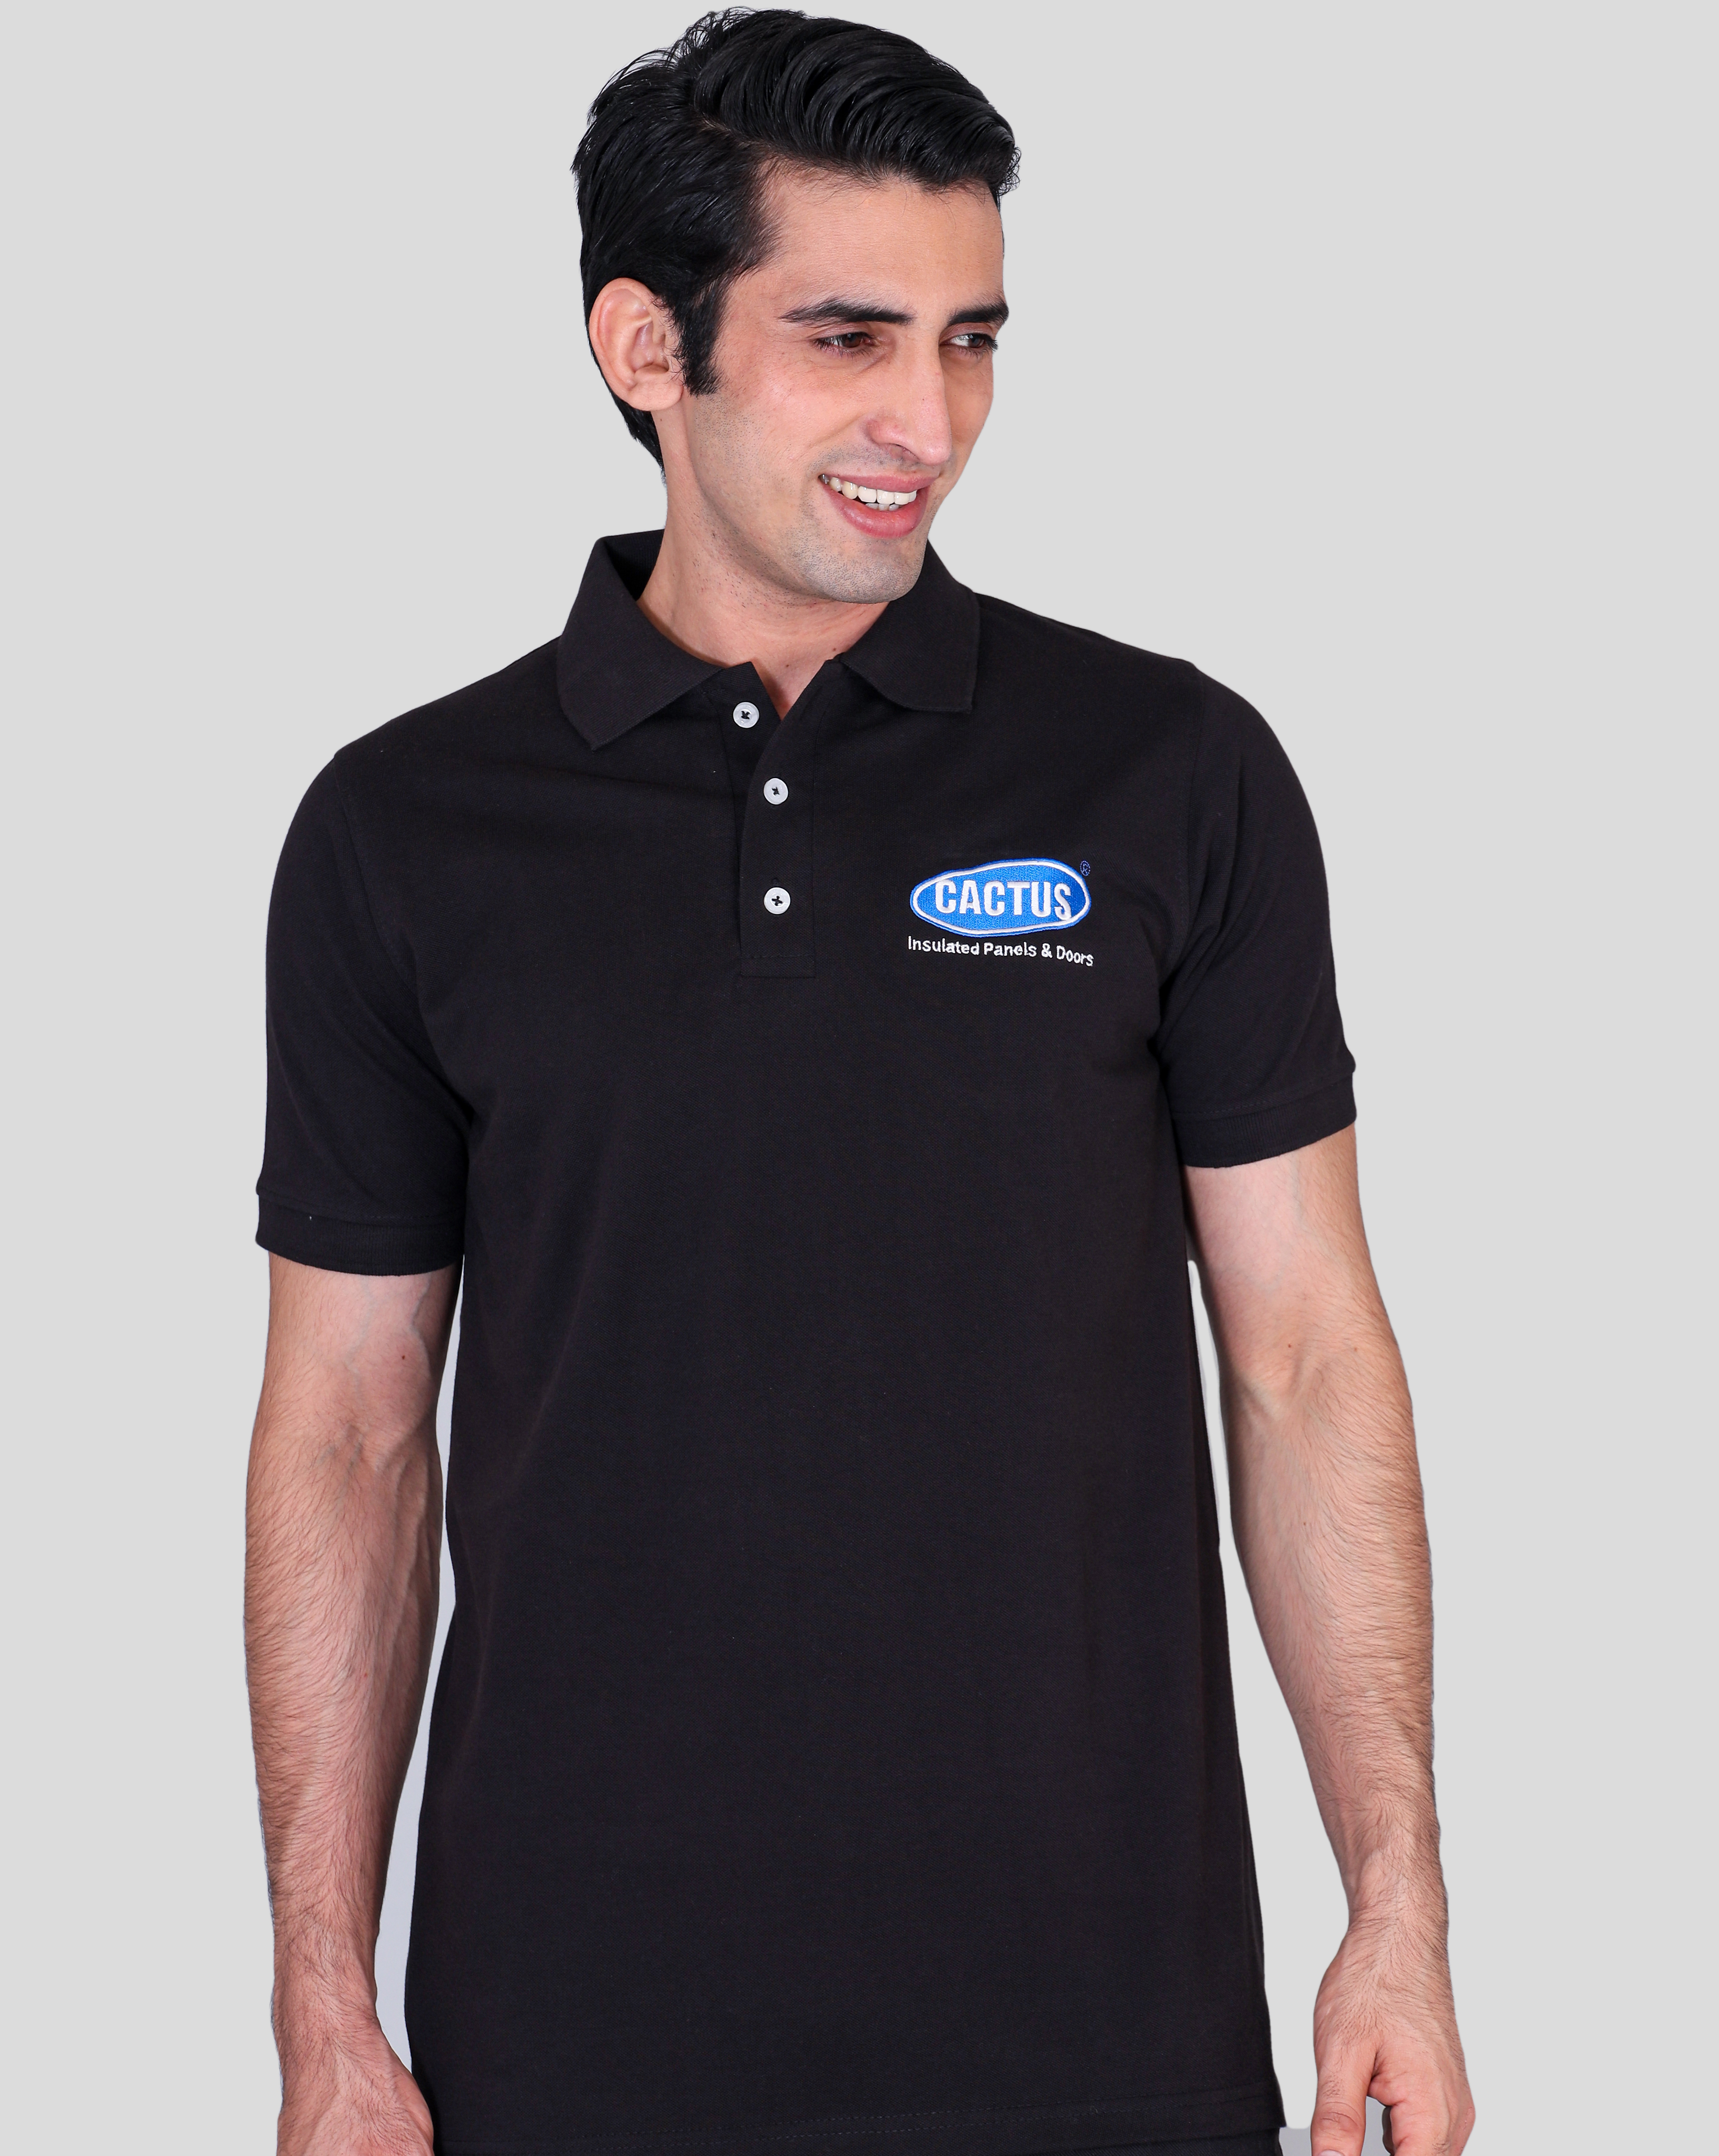 Cactus black promotional polo t-shirts supplier 